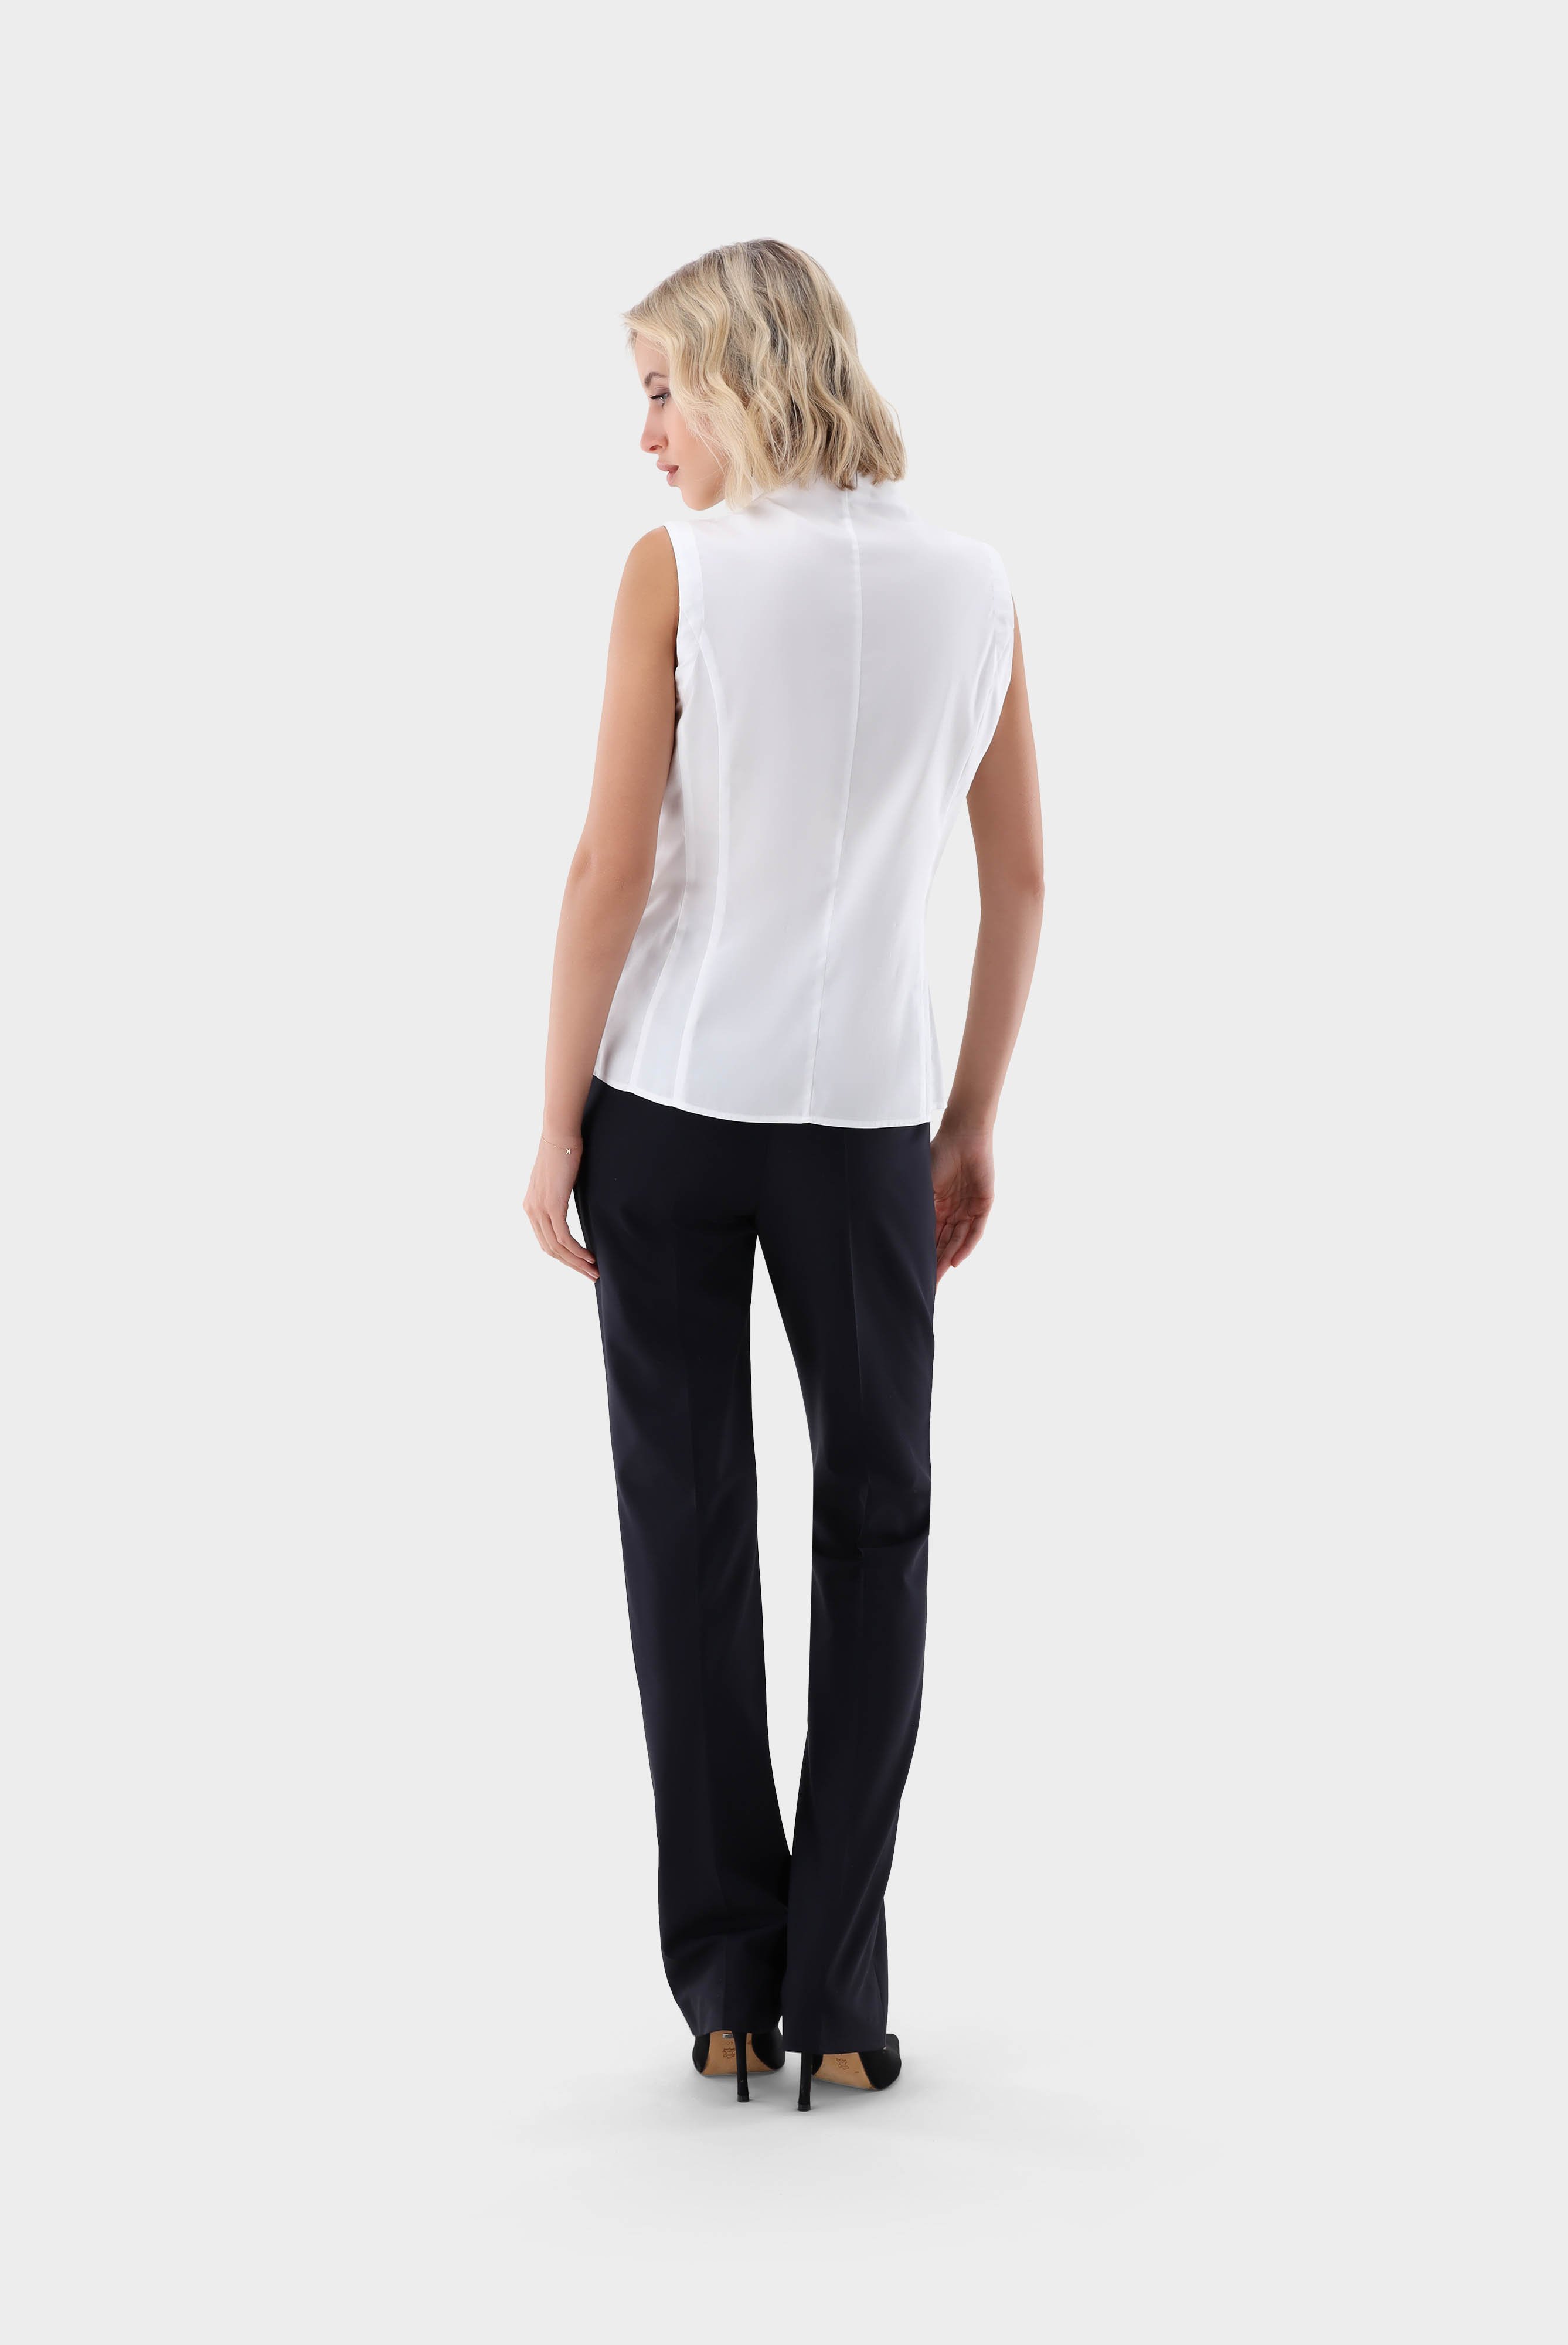 Jeans & Trousers+Classic Business Trousers in Wool Stretch+04.6083..H00528.790.32